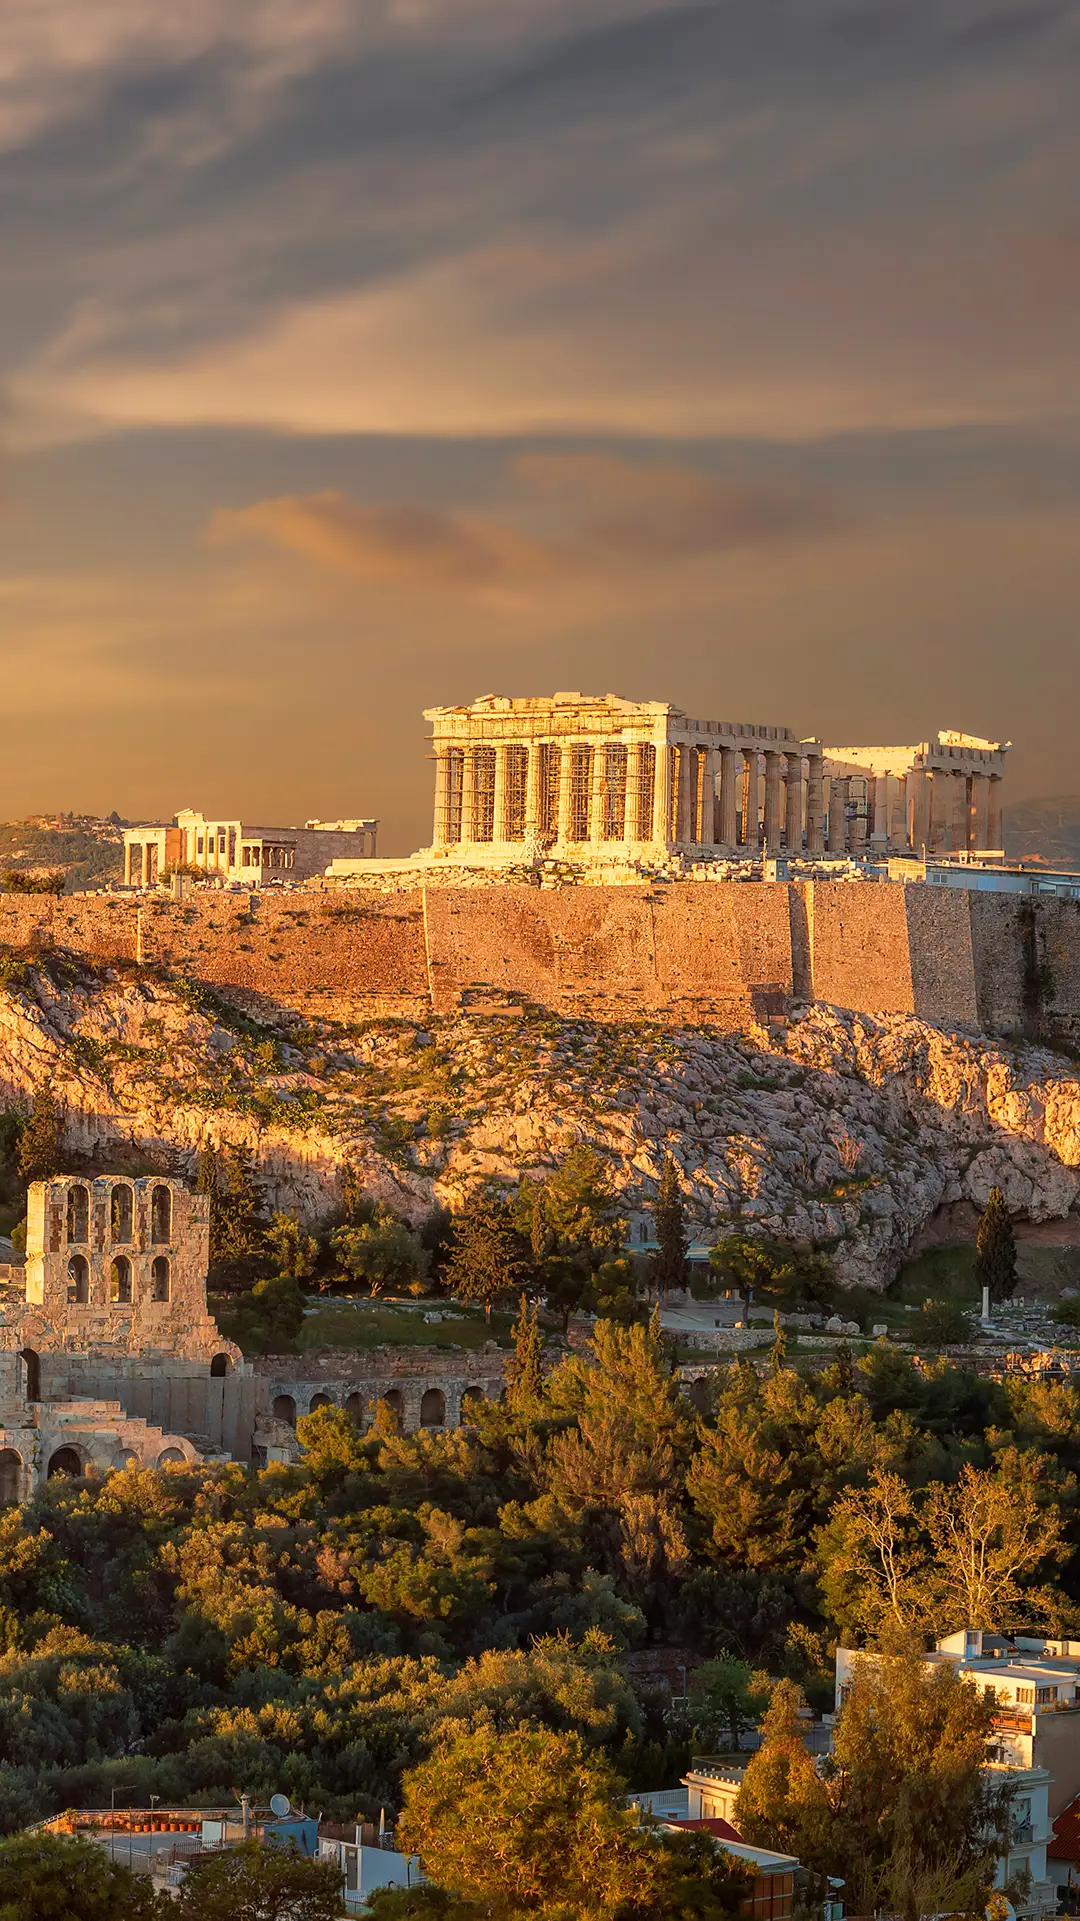 Akropolis of Athens at sunset.